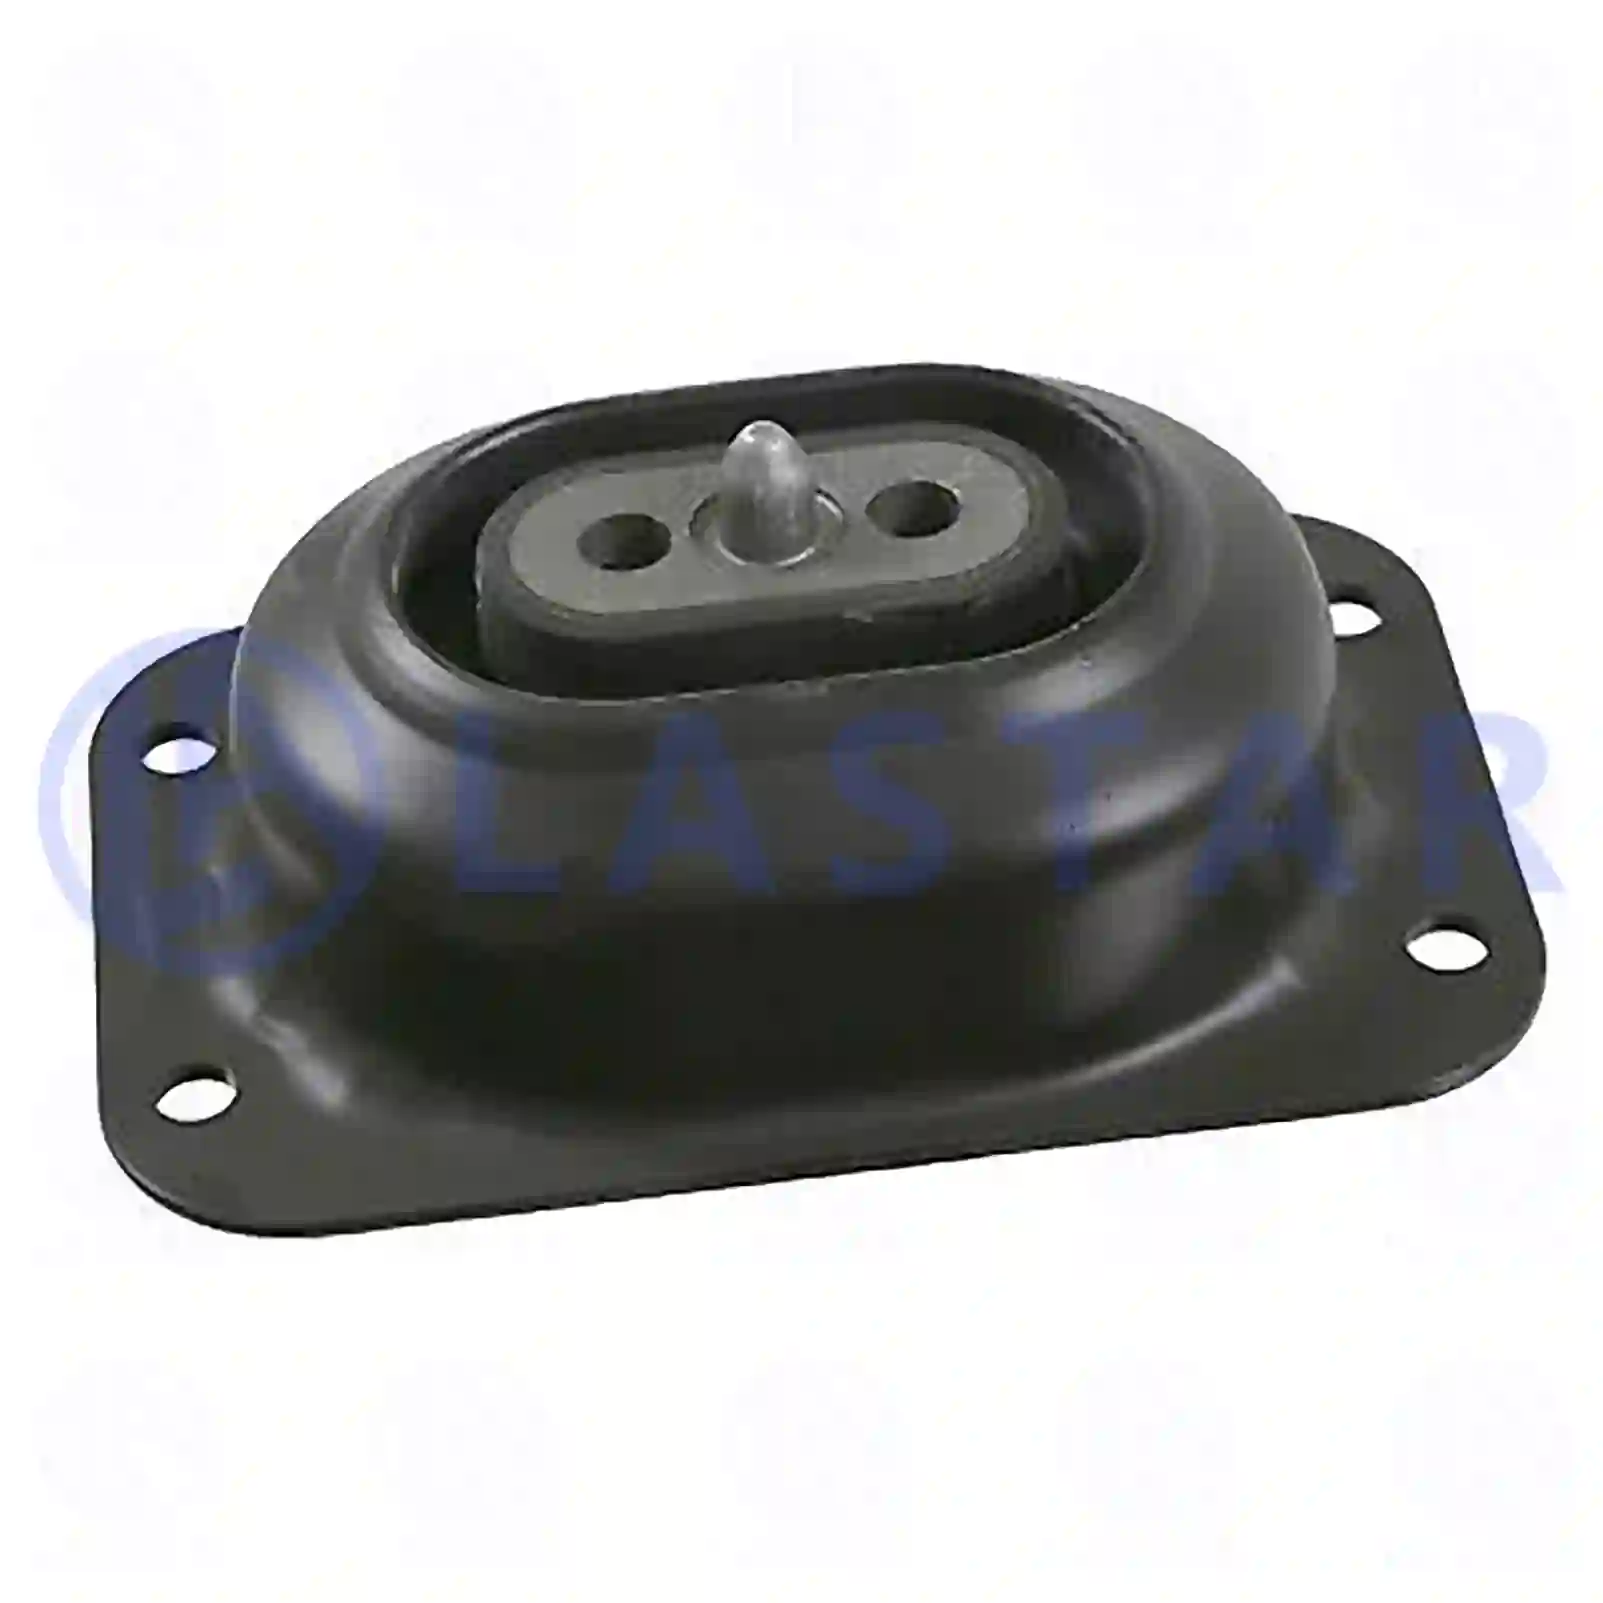 Engine mounting, front, 77700059, 7420503551, 1622825, 20503551, , , ||  77700059 Lastar Spare Part | Truck Spare Parts, Auotomotive Spare Parts Engine mounting, front, 77700059, 7420503551, 1622825, 20503551, , , ||  77700059 Lastar Spare Part | Truck Spare Parts, Auotomotive Spare Parts